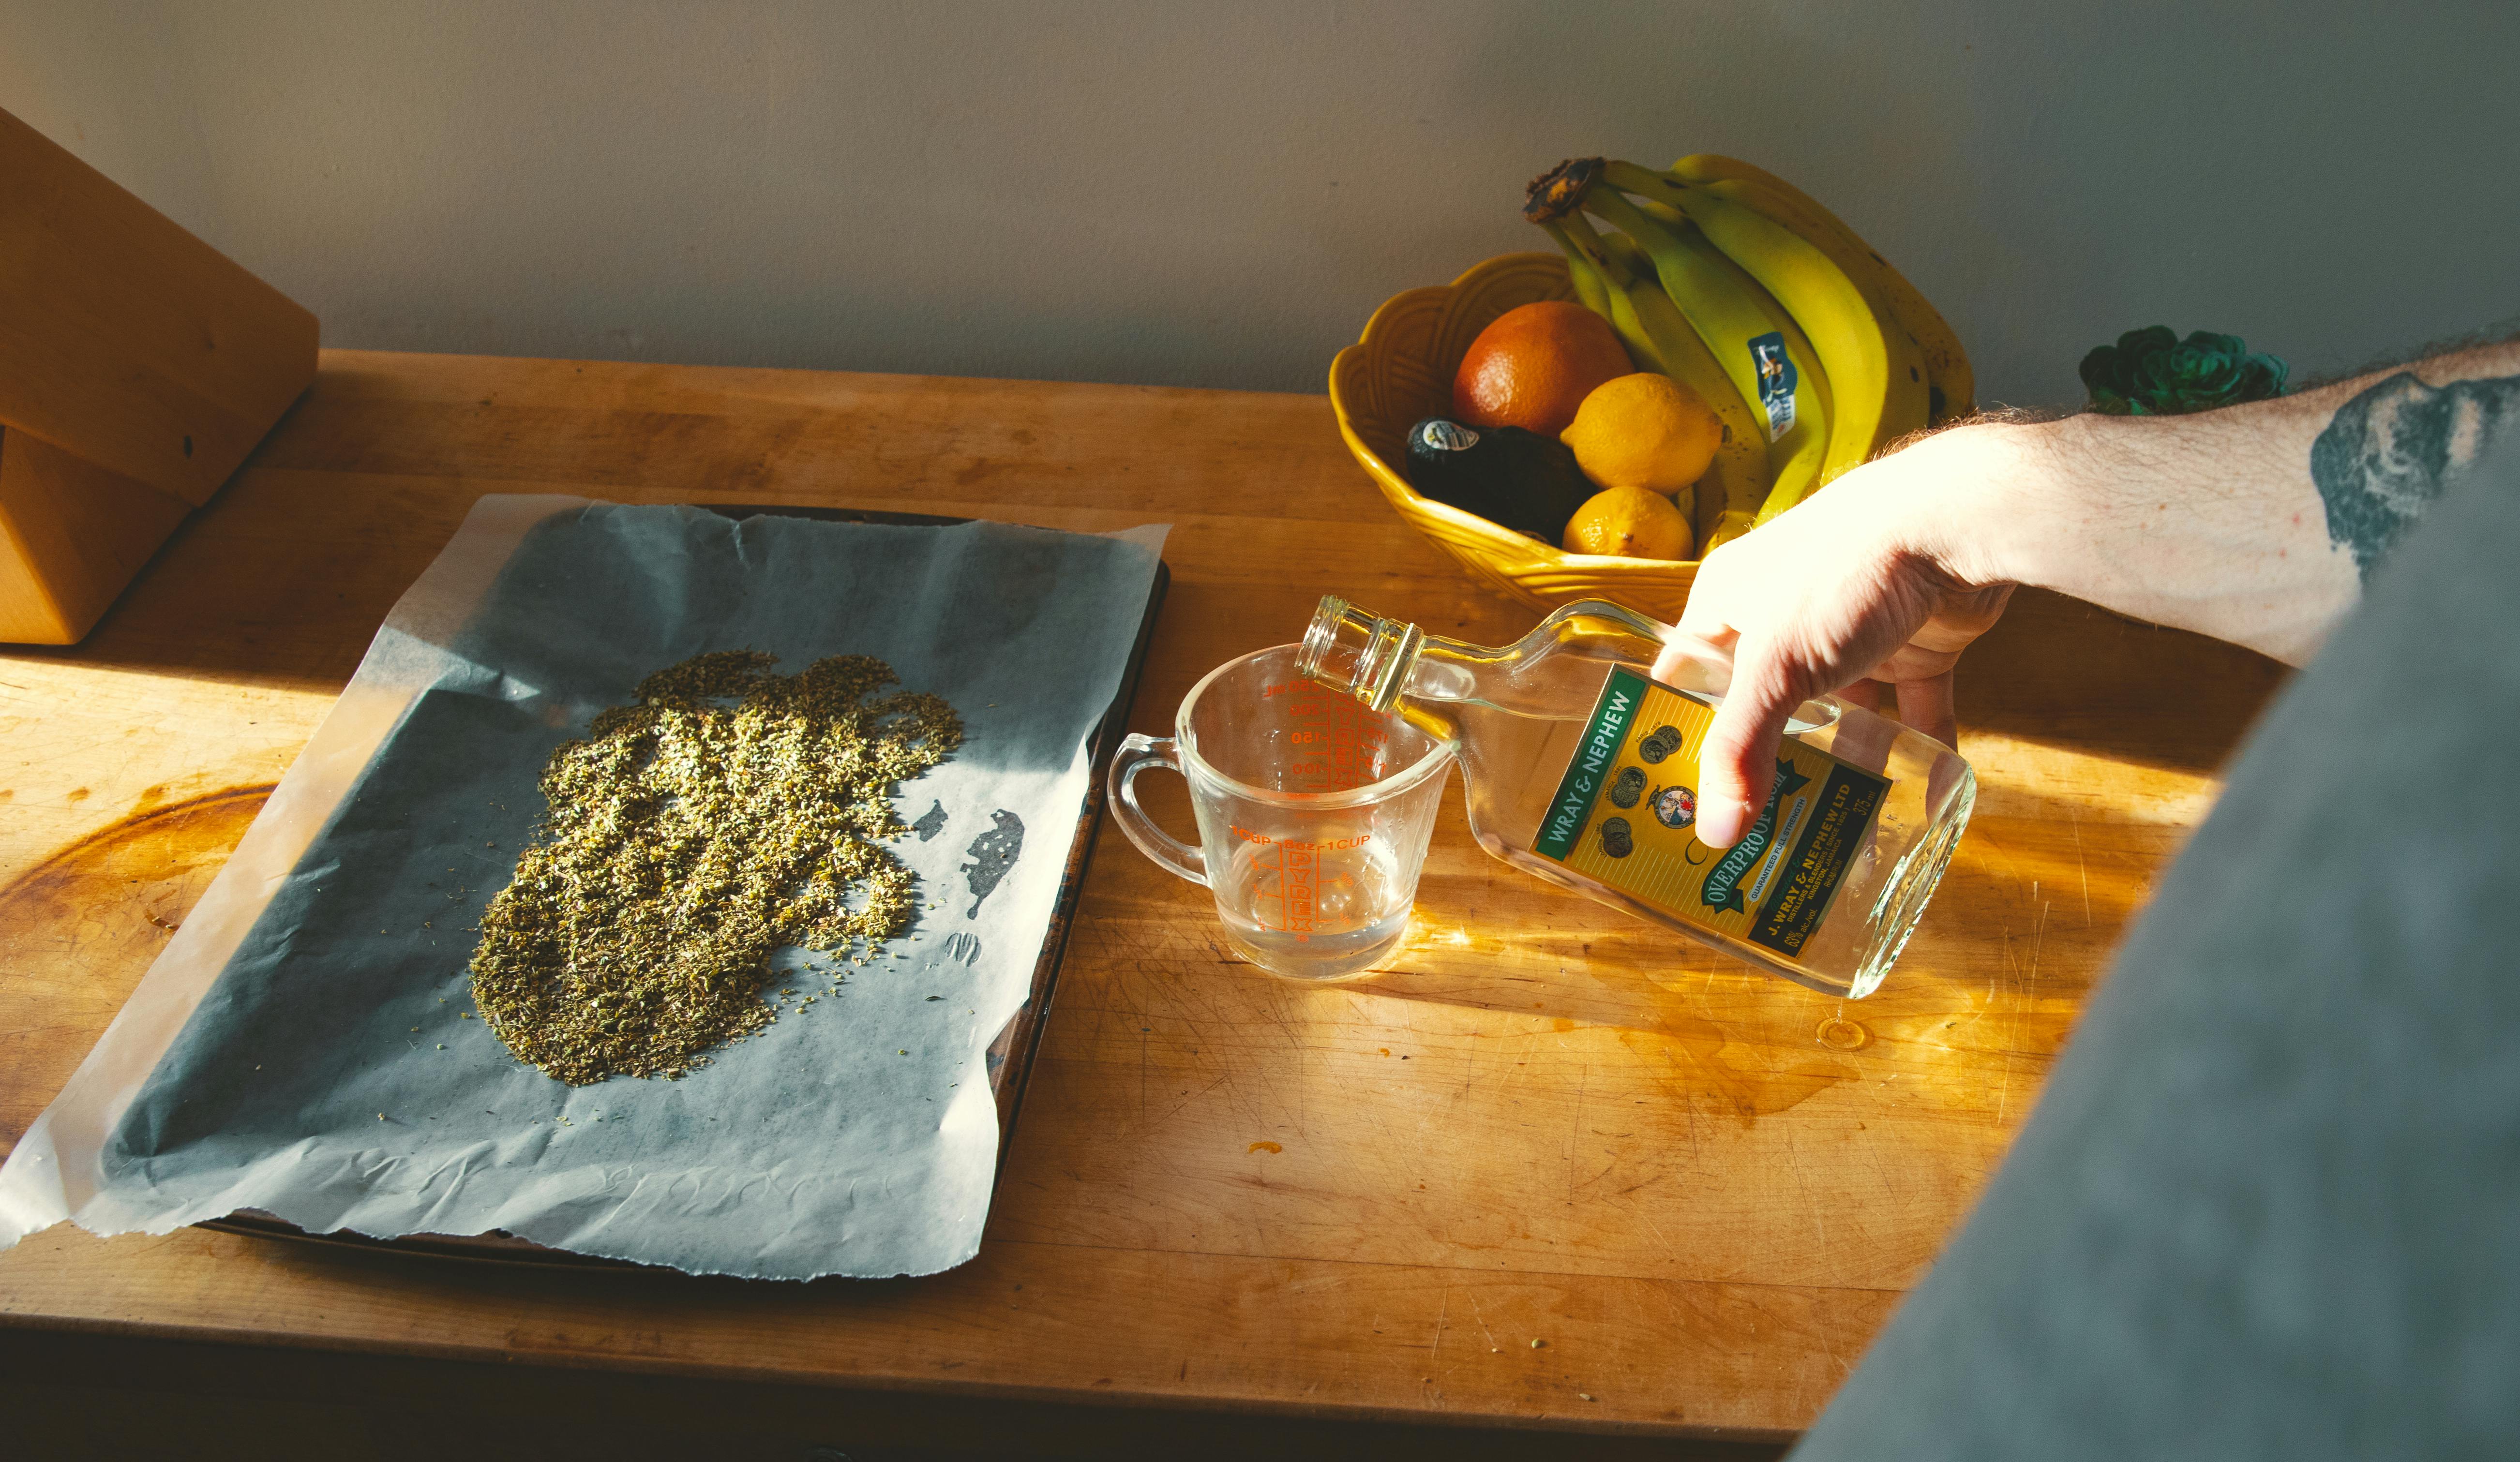 A hand pours alcohol into a measuring cup next to a baking sheet covered in ground up flower. Learn how to make cannabis tincture with this handy guide.